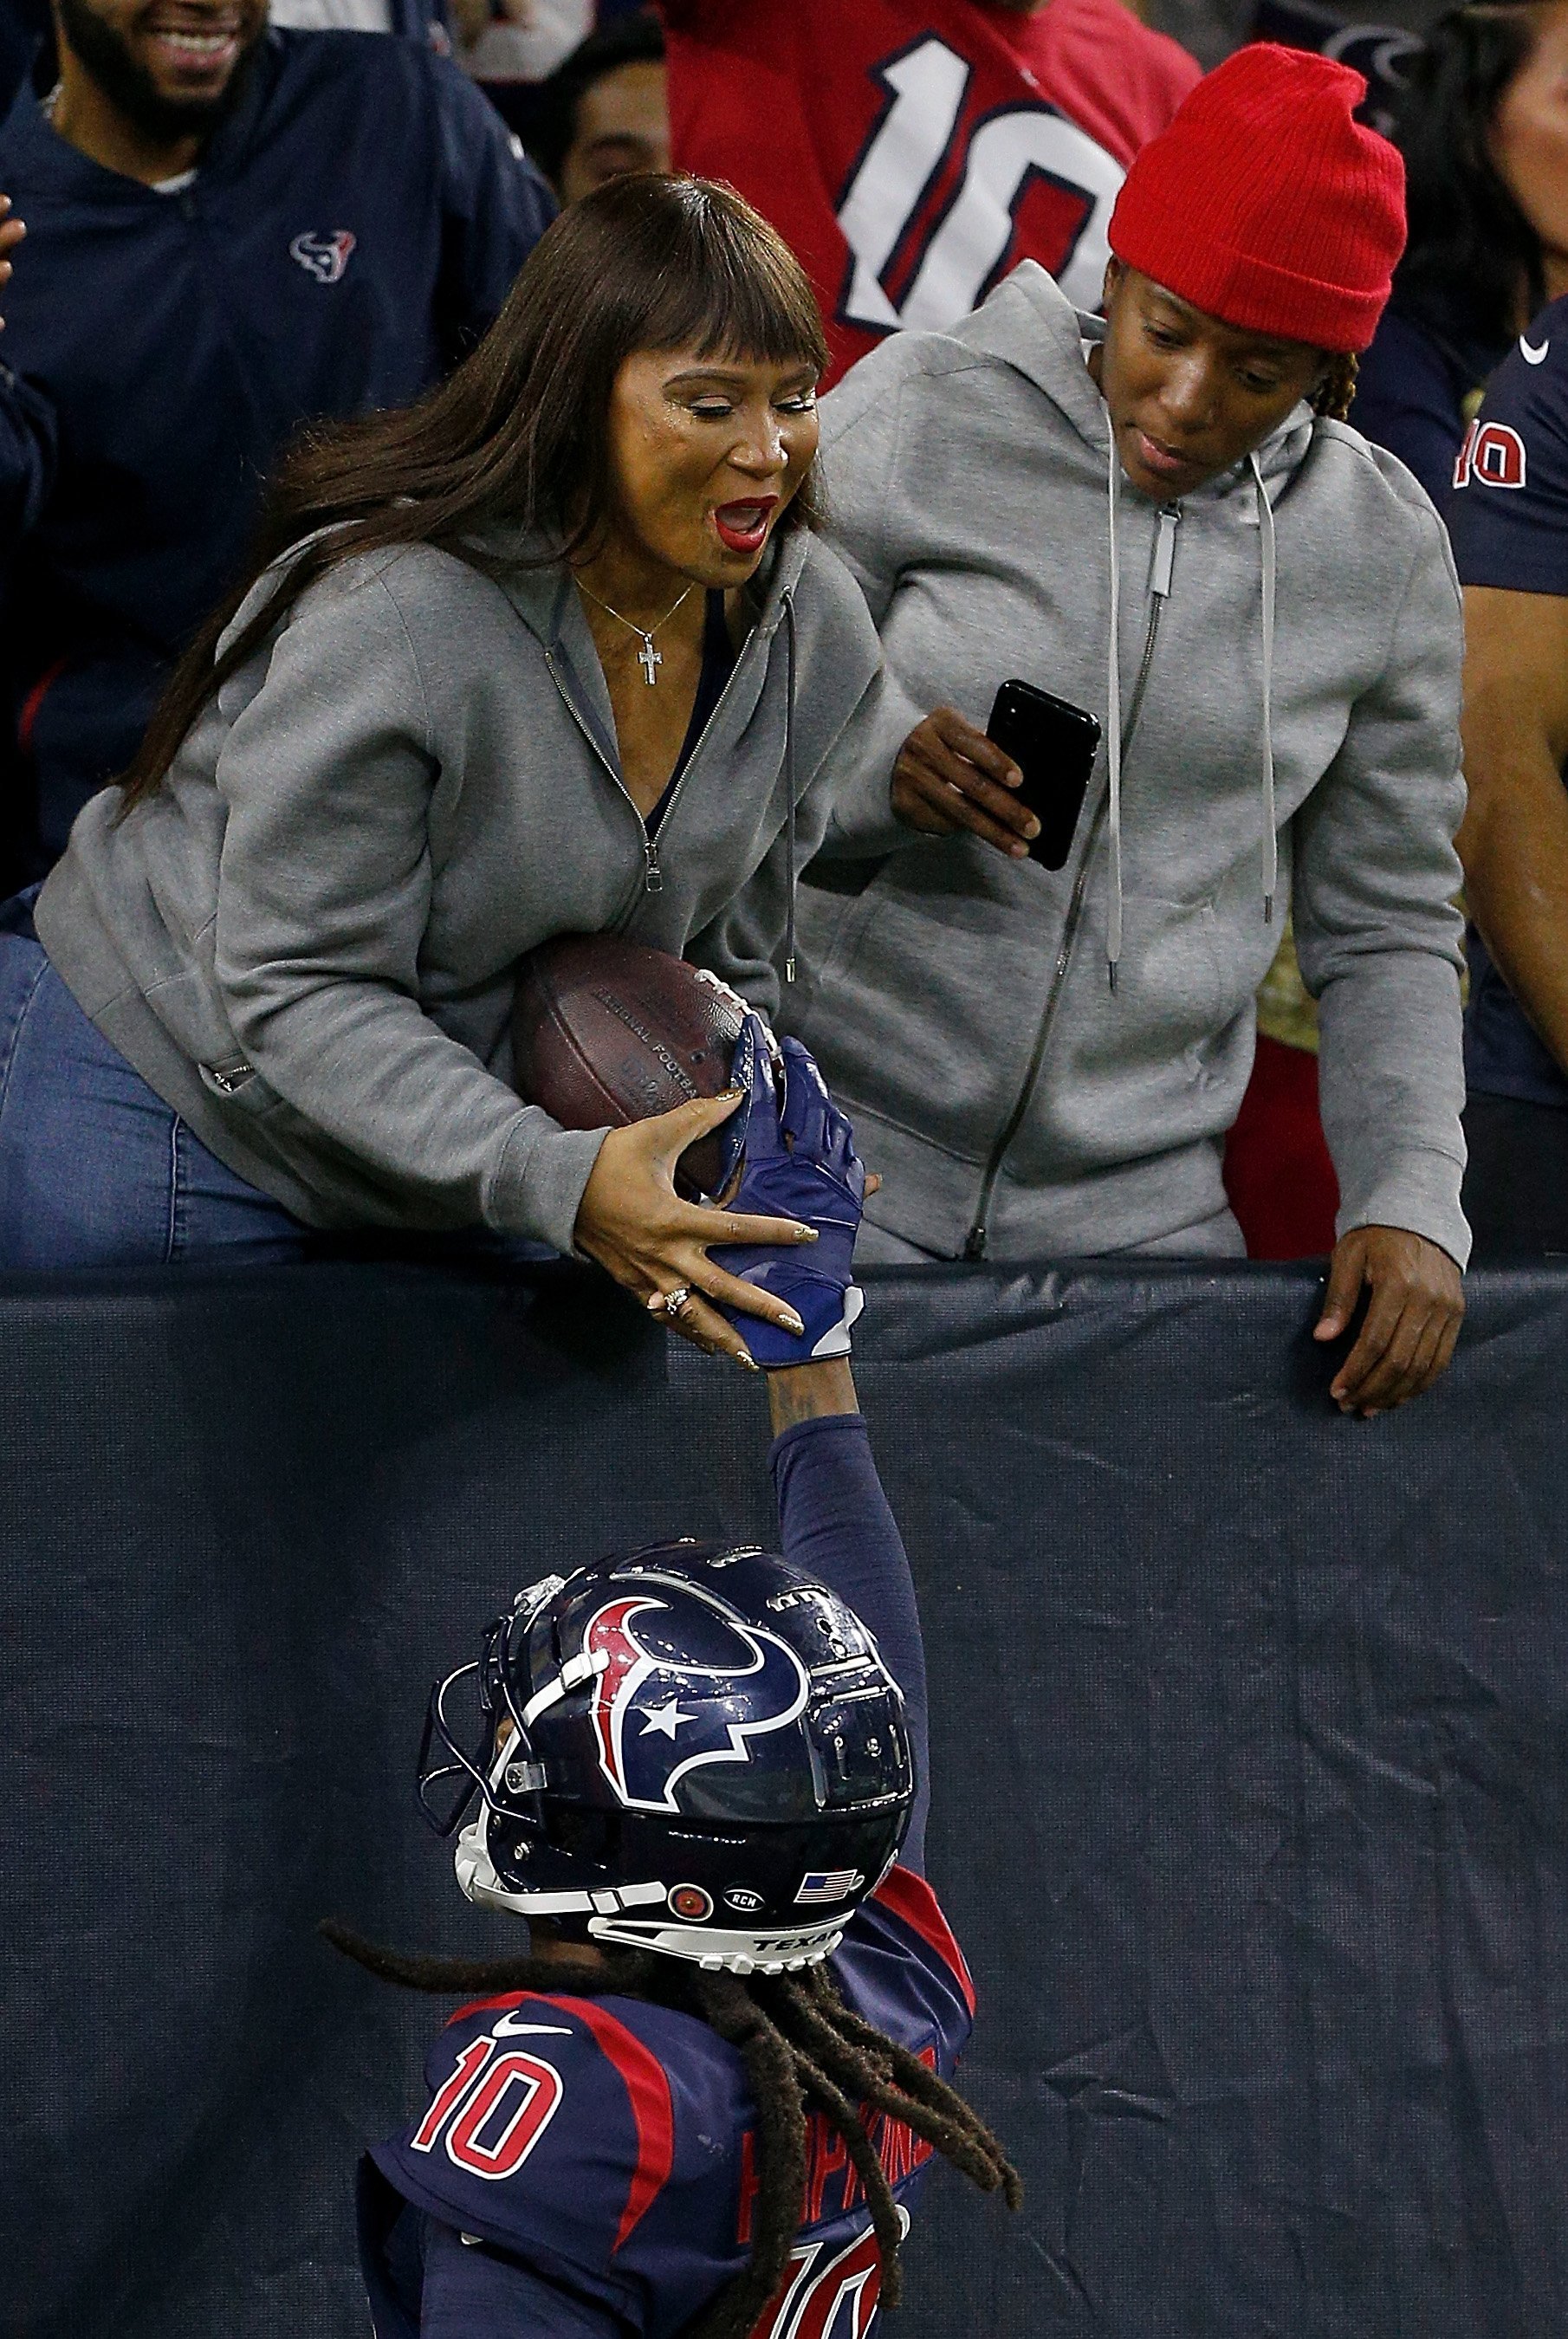 DeAndre Hopkins #10 of the Houston Texans hand the ball to his mother, Sabrina Greenlee after a touchdown in the second quarter over the Indianapolis Colts on November 21, 2019 | Photo: GettyImages